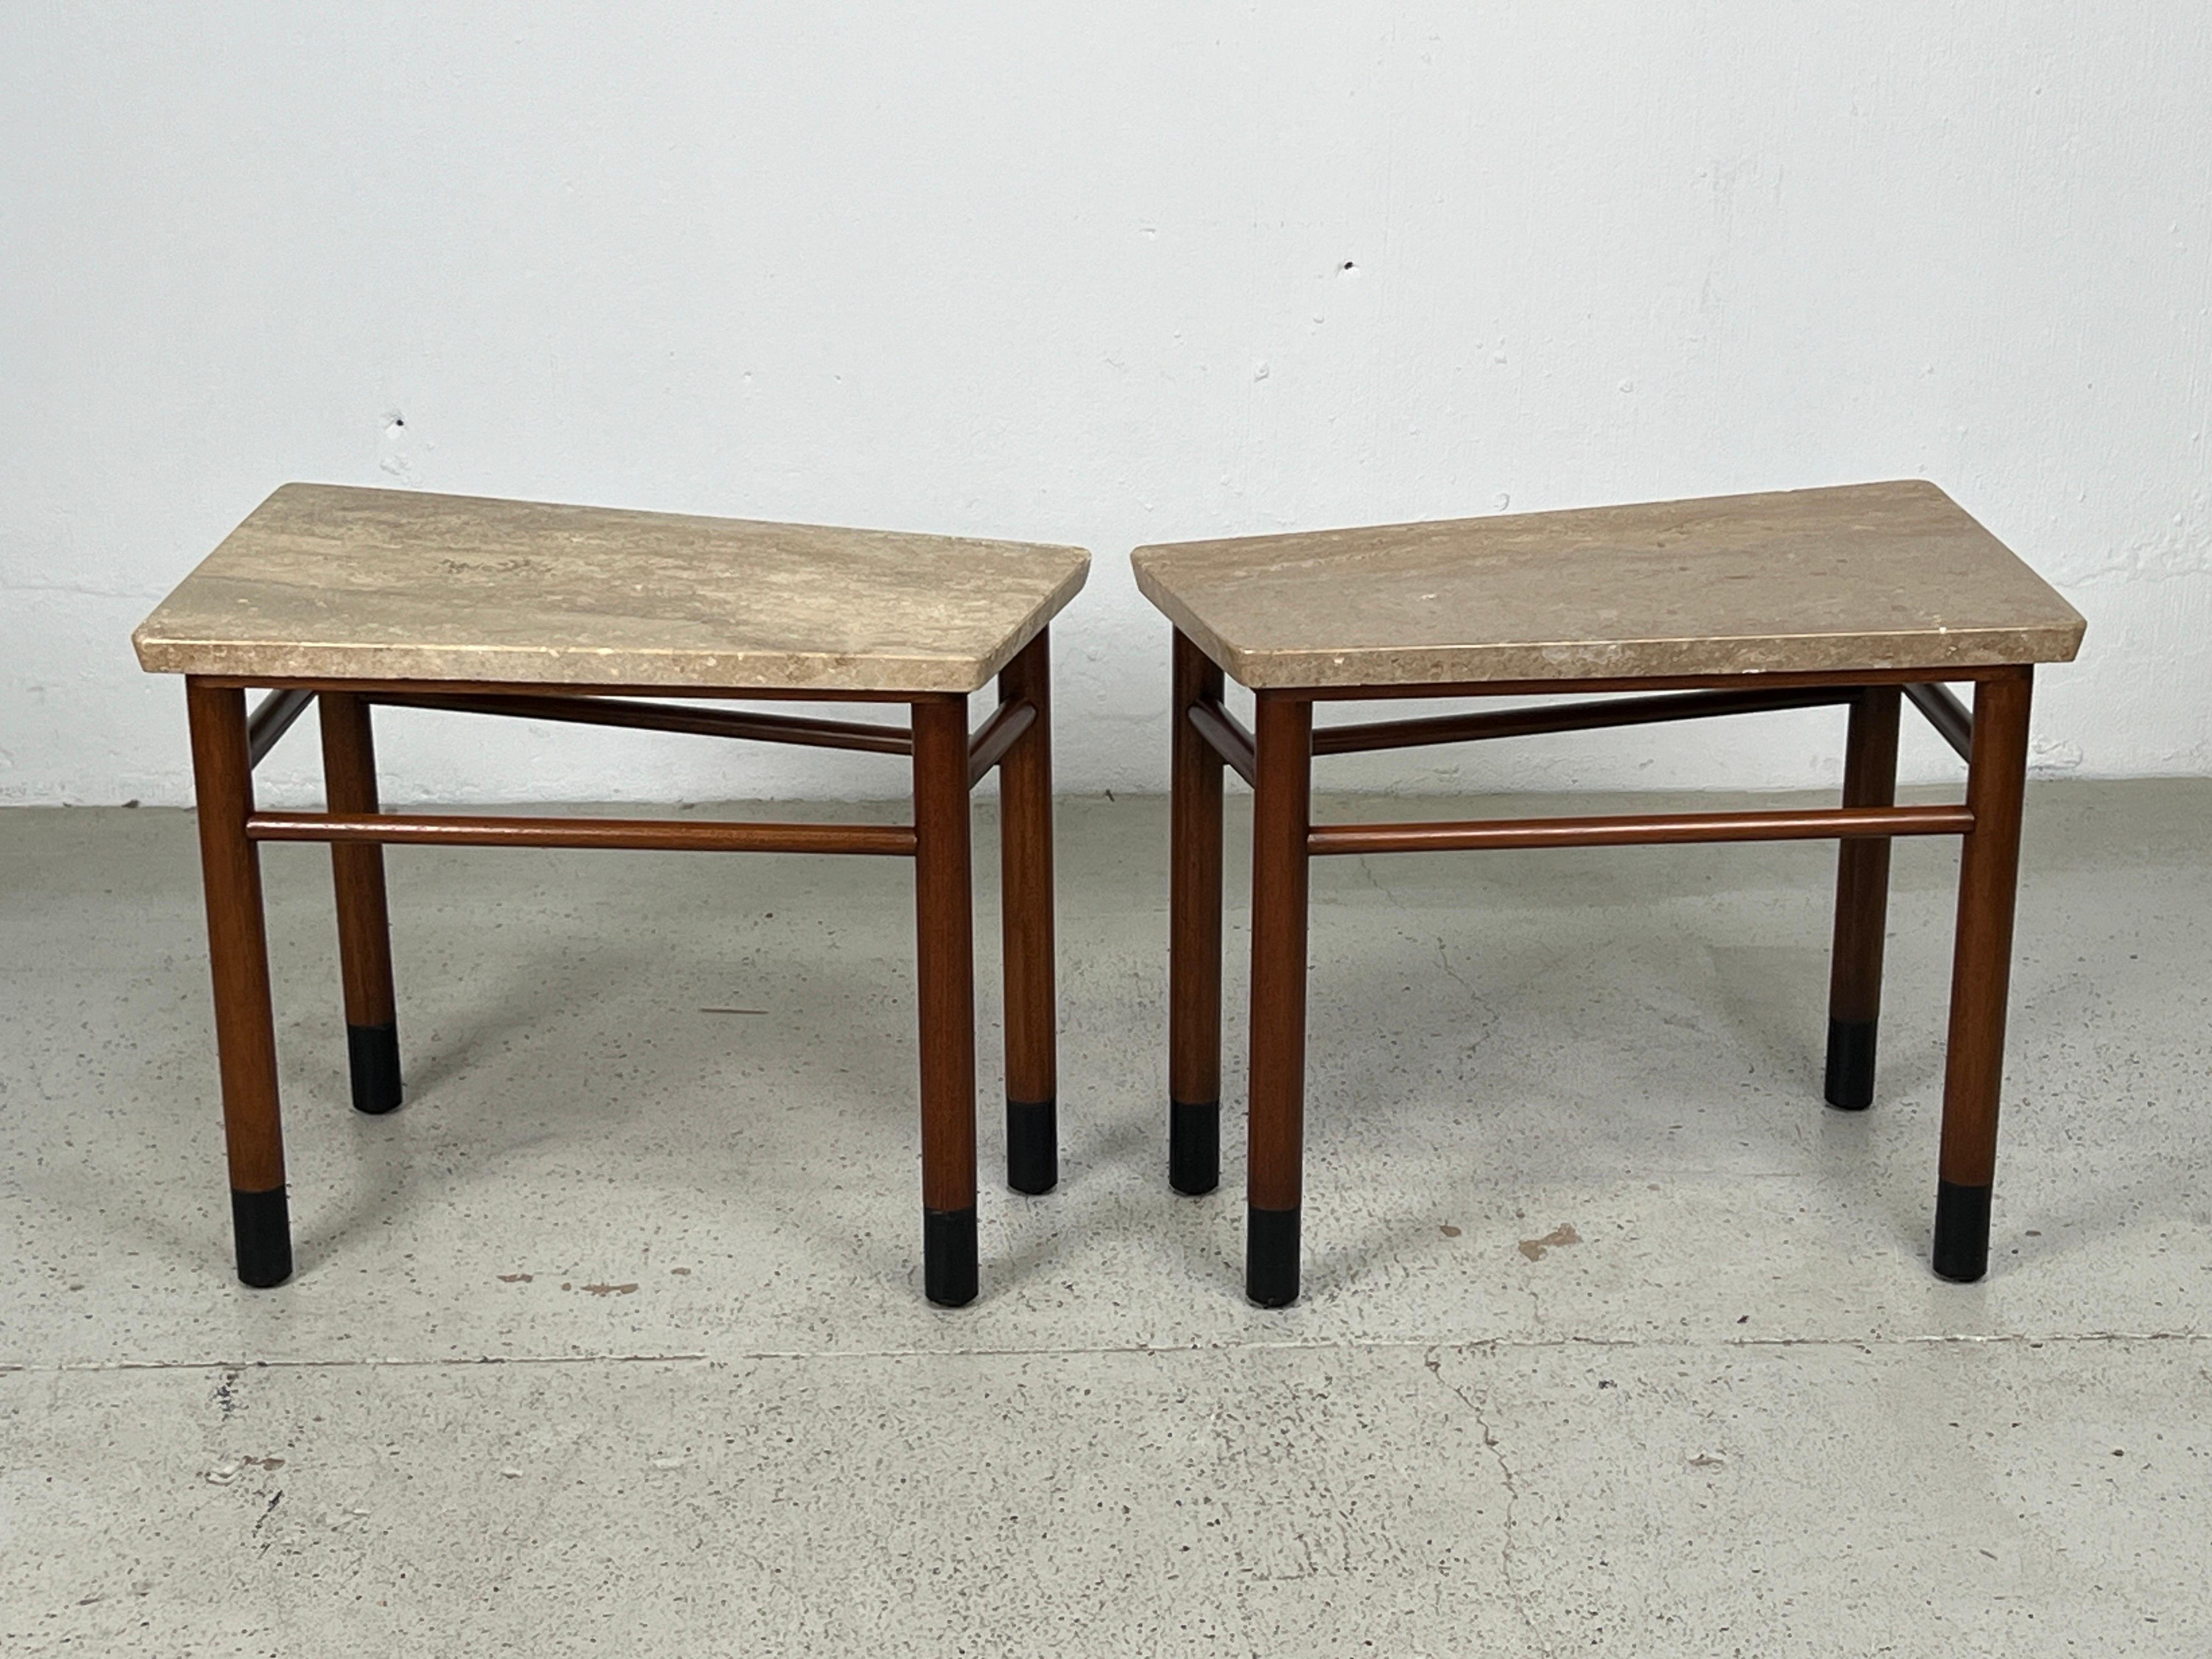 Pair of Wedge Shaped Travertine Tables by Edward Wormley for Dunbar For Sale 5